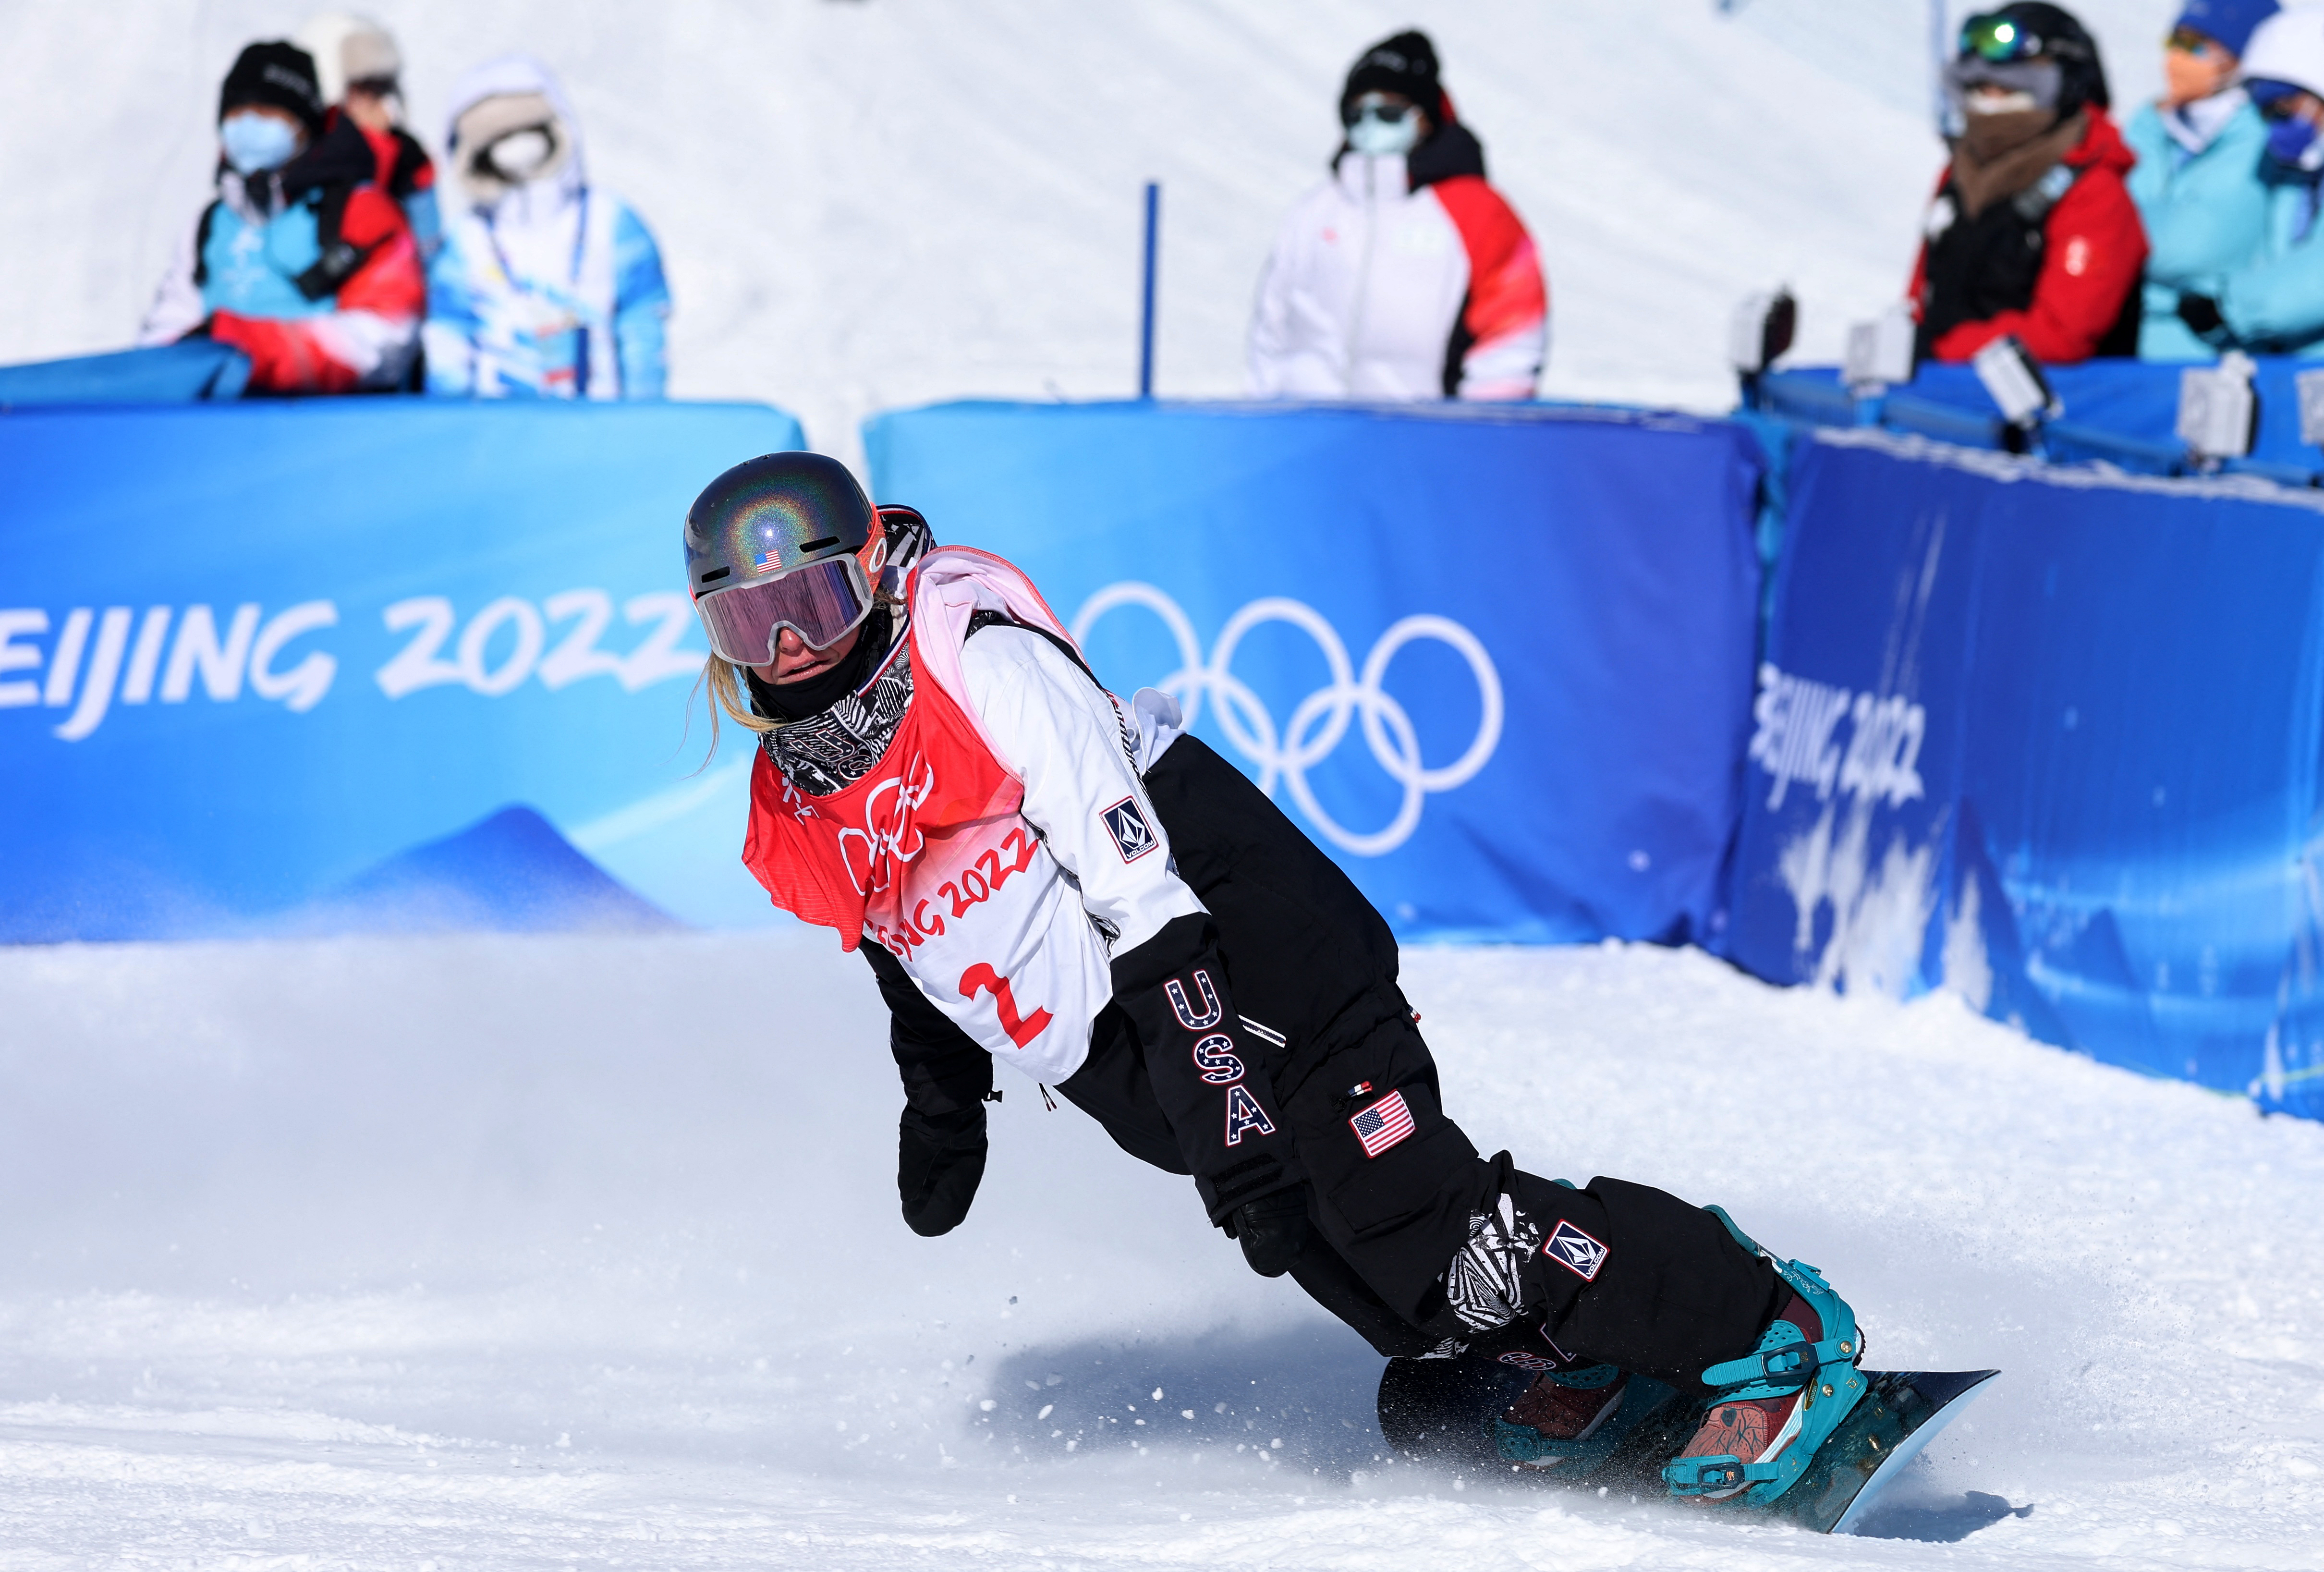 How competing on fake snow affects the performance of Olympic skiers and  snowboarders